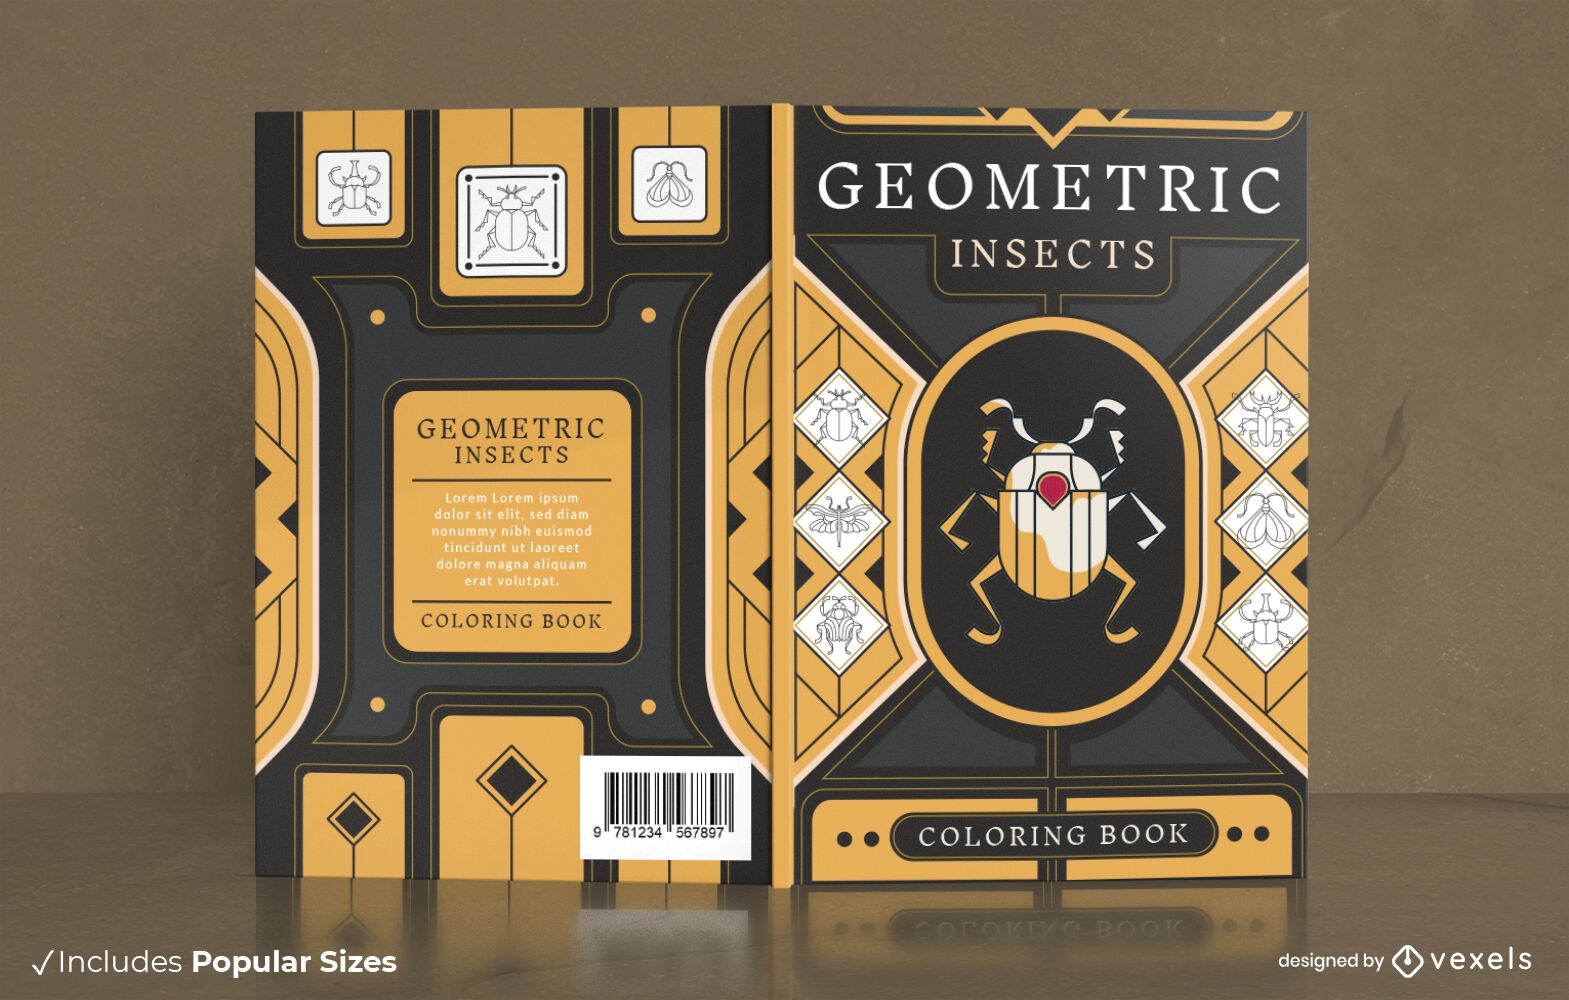 Geometric insects Book cover design